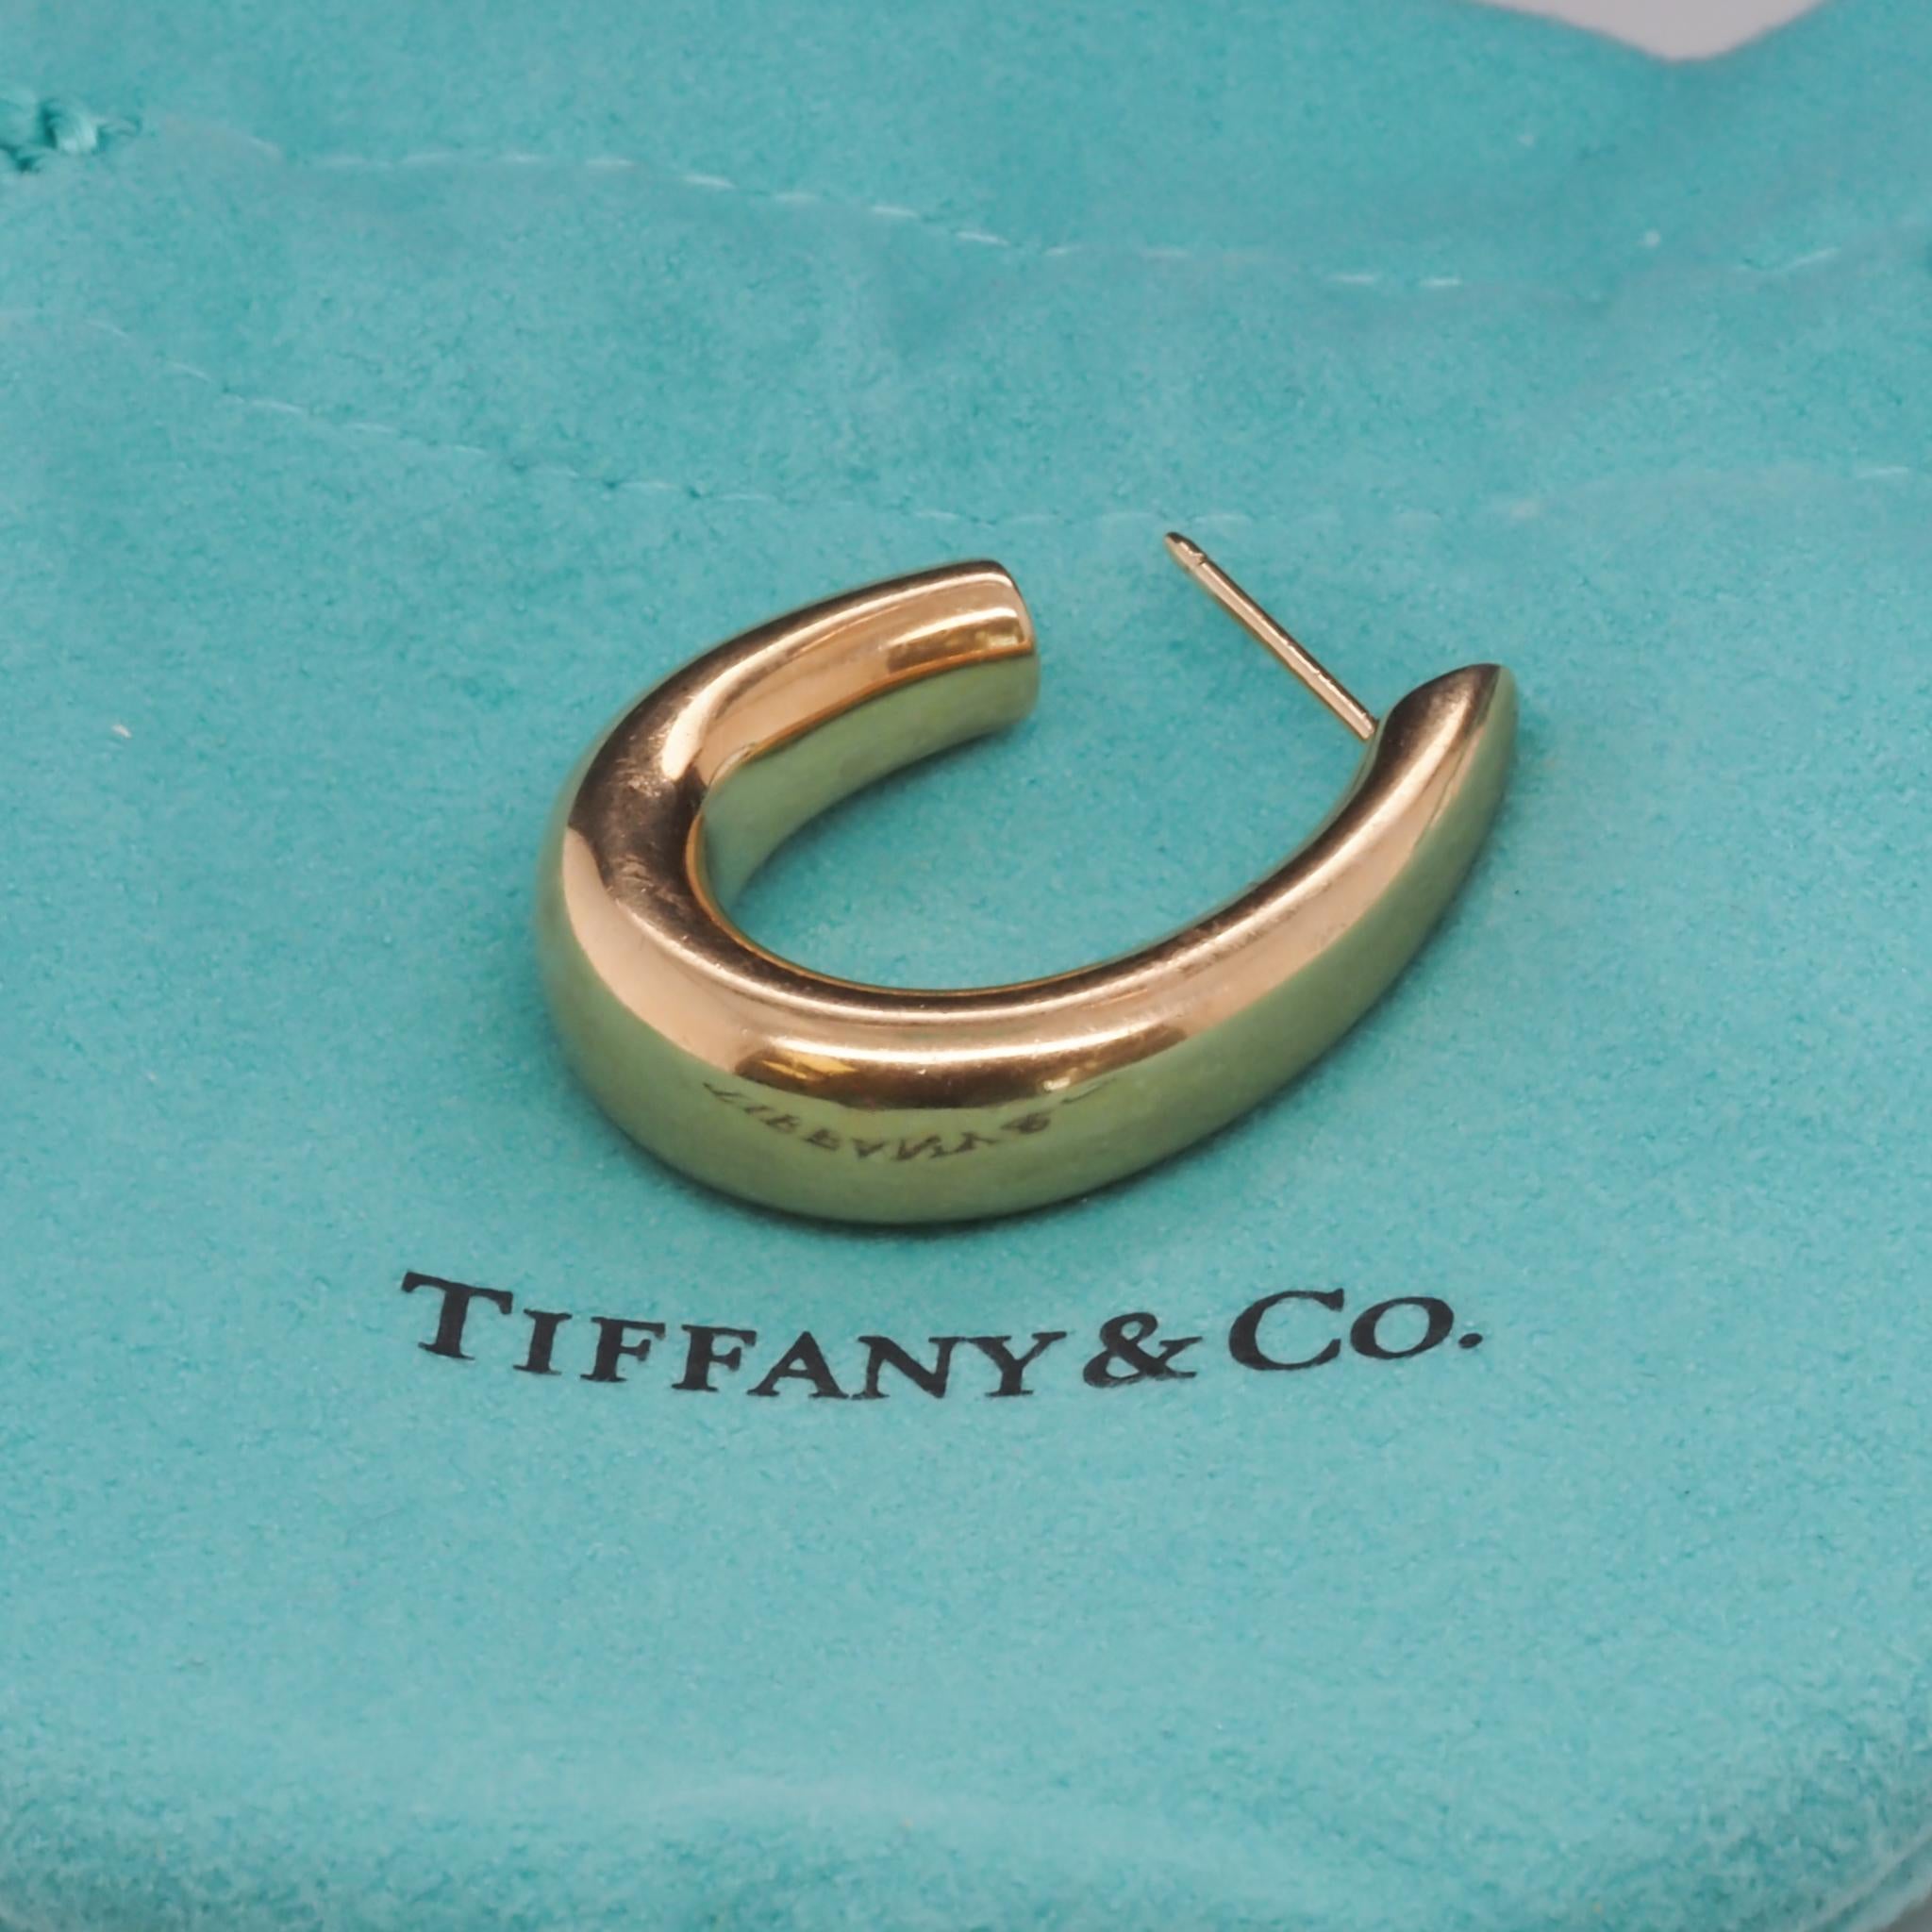 Tiffany & Co 14k Yellow Gold Hoop Earrings with Pouch 1